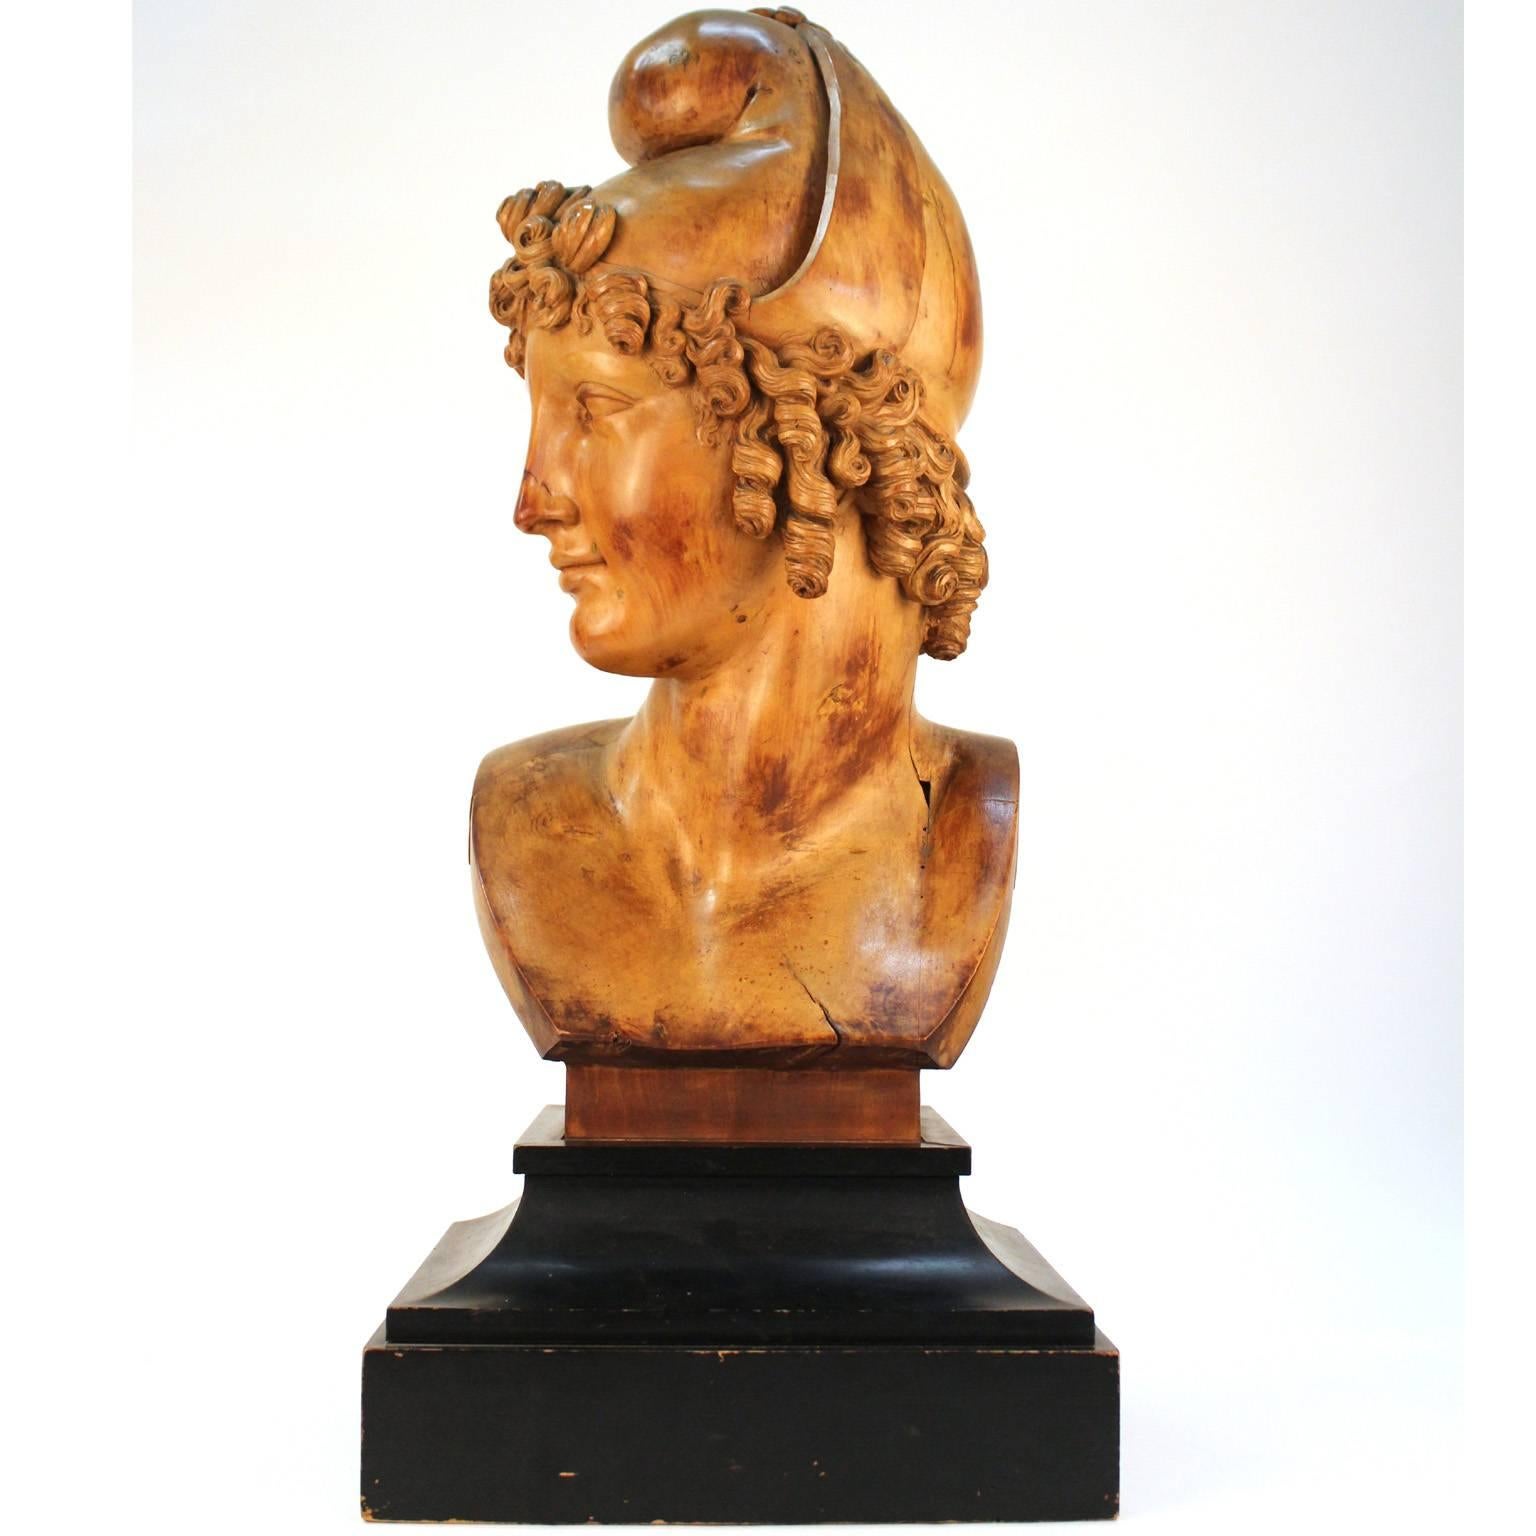 Italian neoclassical carved olive wood sculpture depicting the head of Paris, circa 1810, after Italian artist Antonio Canova. Examples are known in marble and plaster in multiple major museums. Good condition; some age, cracks, and minor early